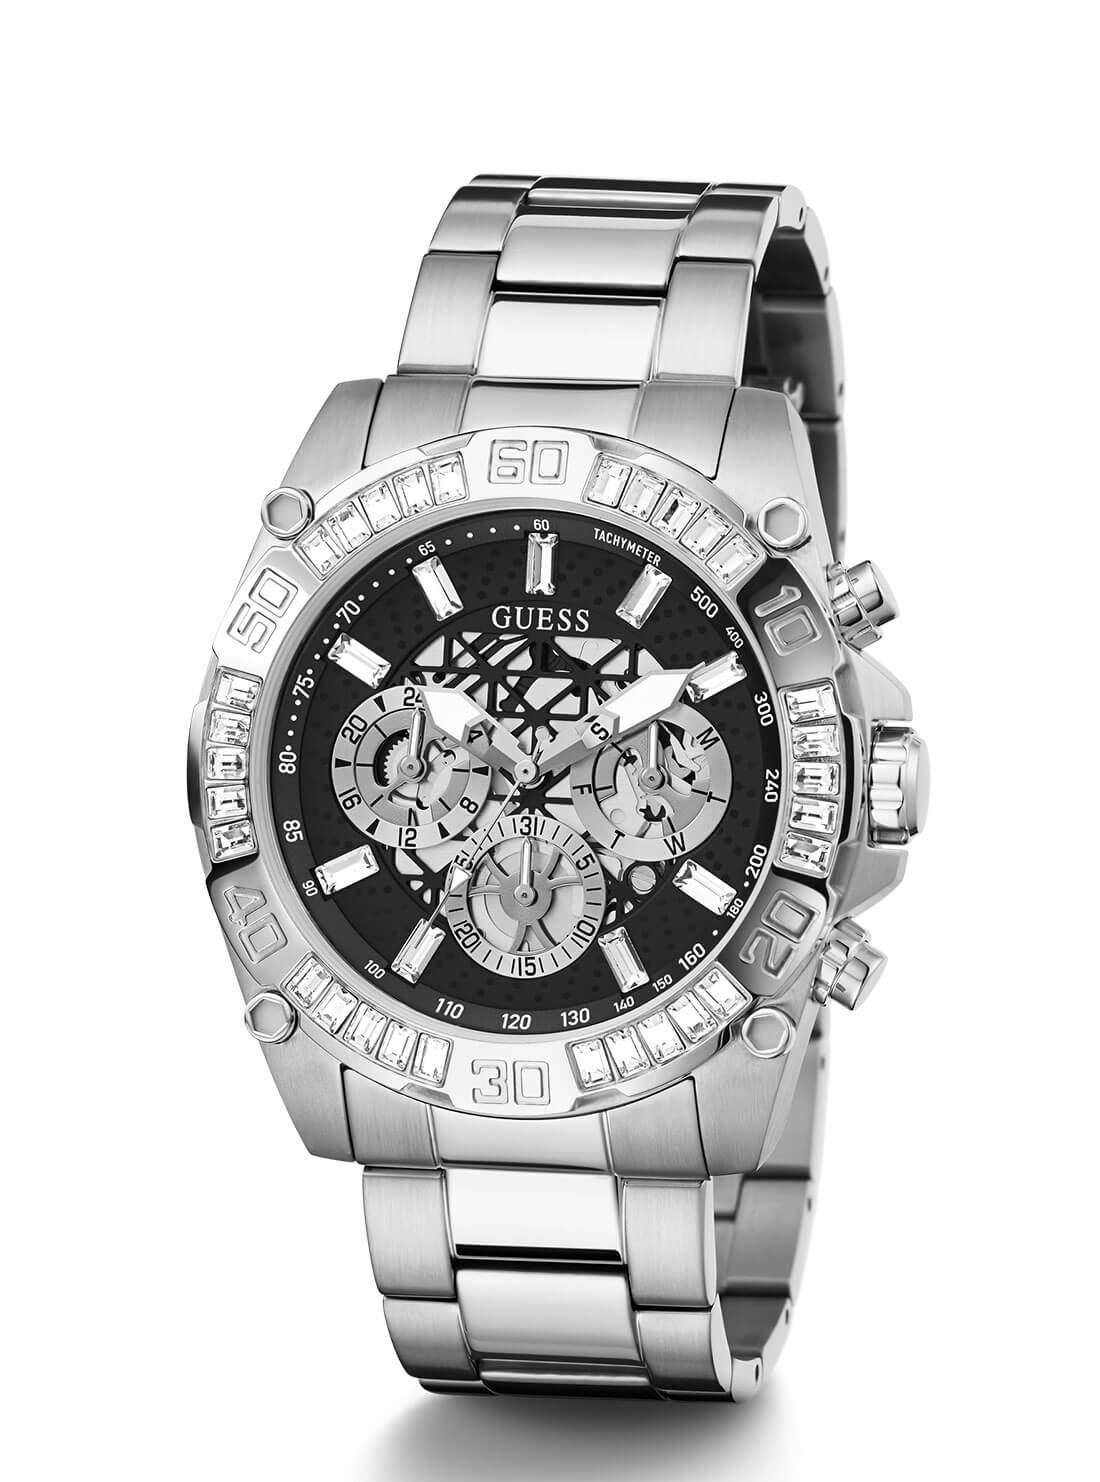    GUESS Mens Silver Trophy Watch Front Angle View